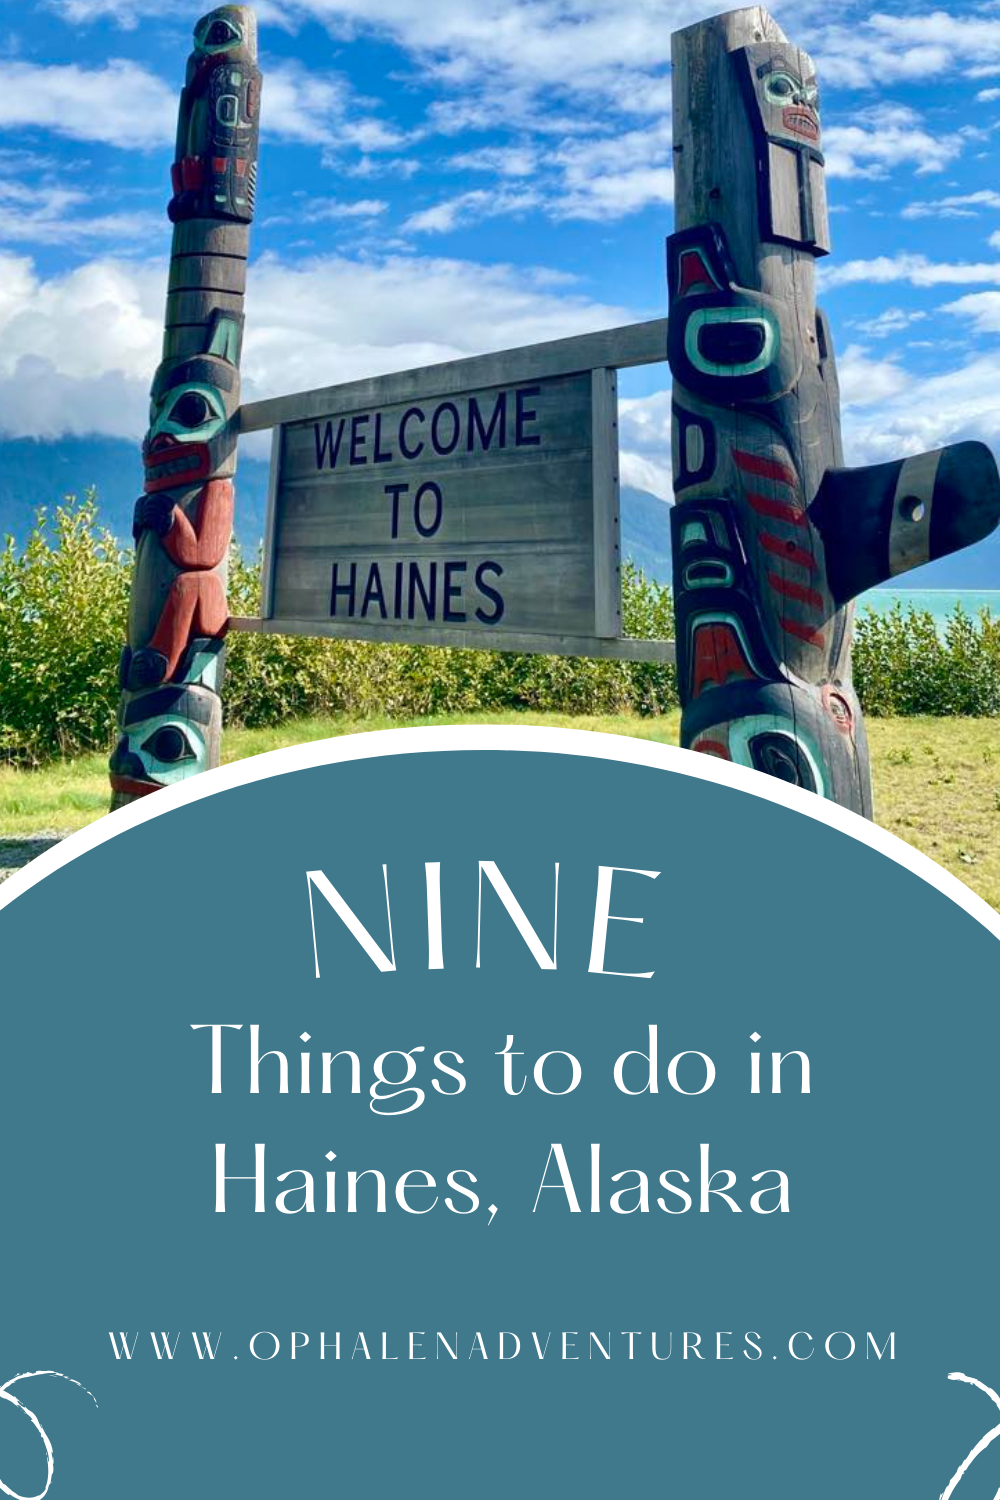 Things to do in Haines Alaska: 9 Unique Adventures